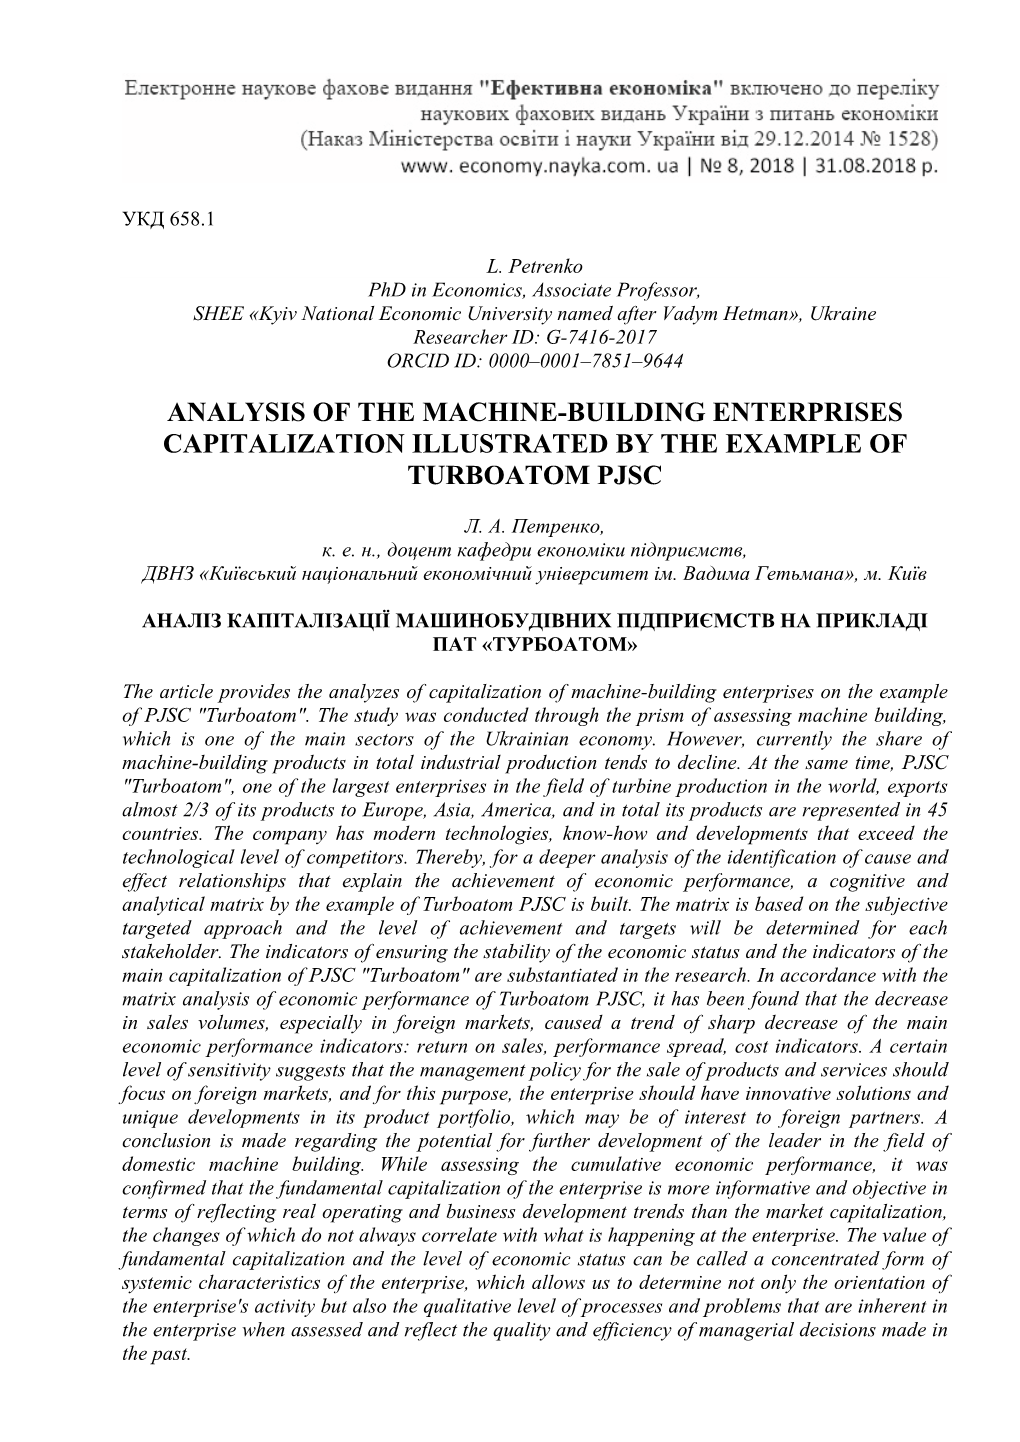 Analysis of the Machine-Building Enterprises Capitalization Illustrated by the Example of Turboatom Pjsc